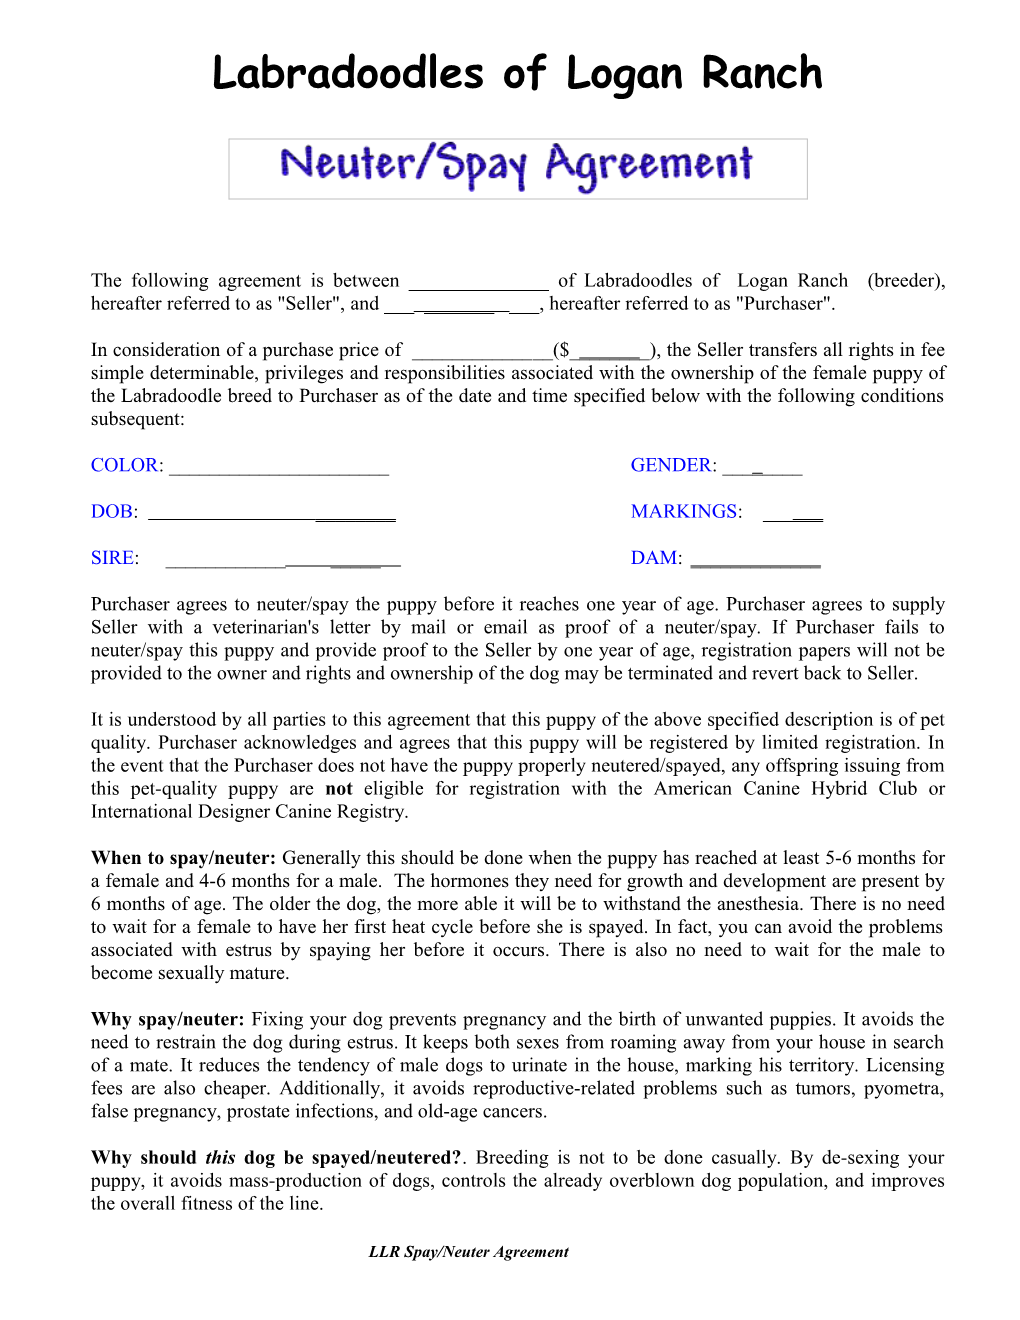 The Following Agreement Is Between ______Of Labradoodles of Logan Ranch (Breeder), Hereafter